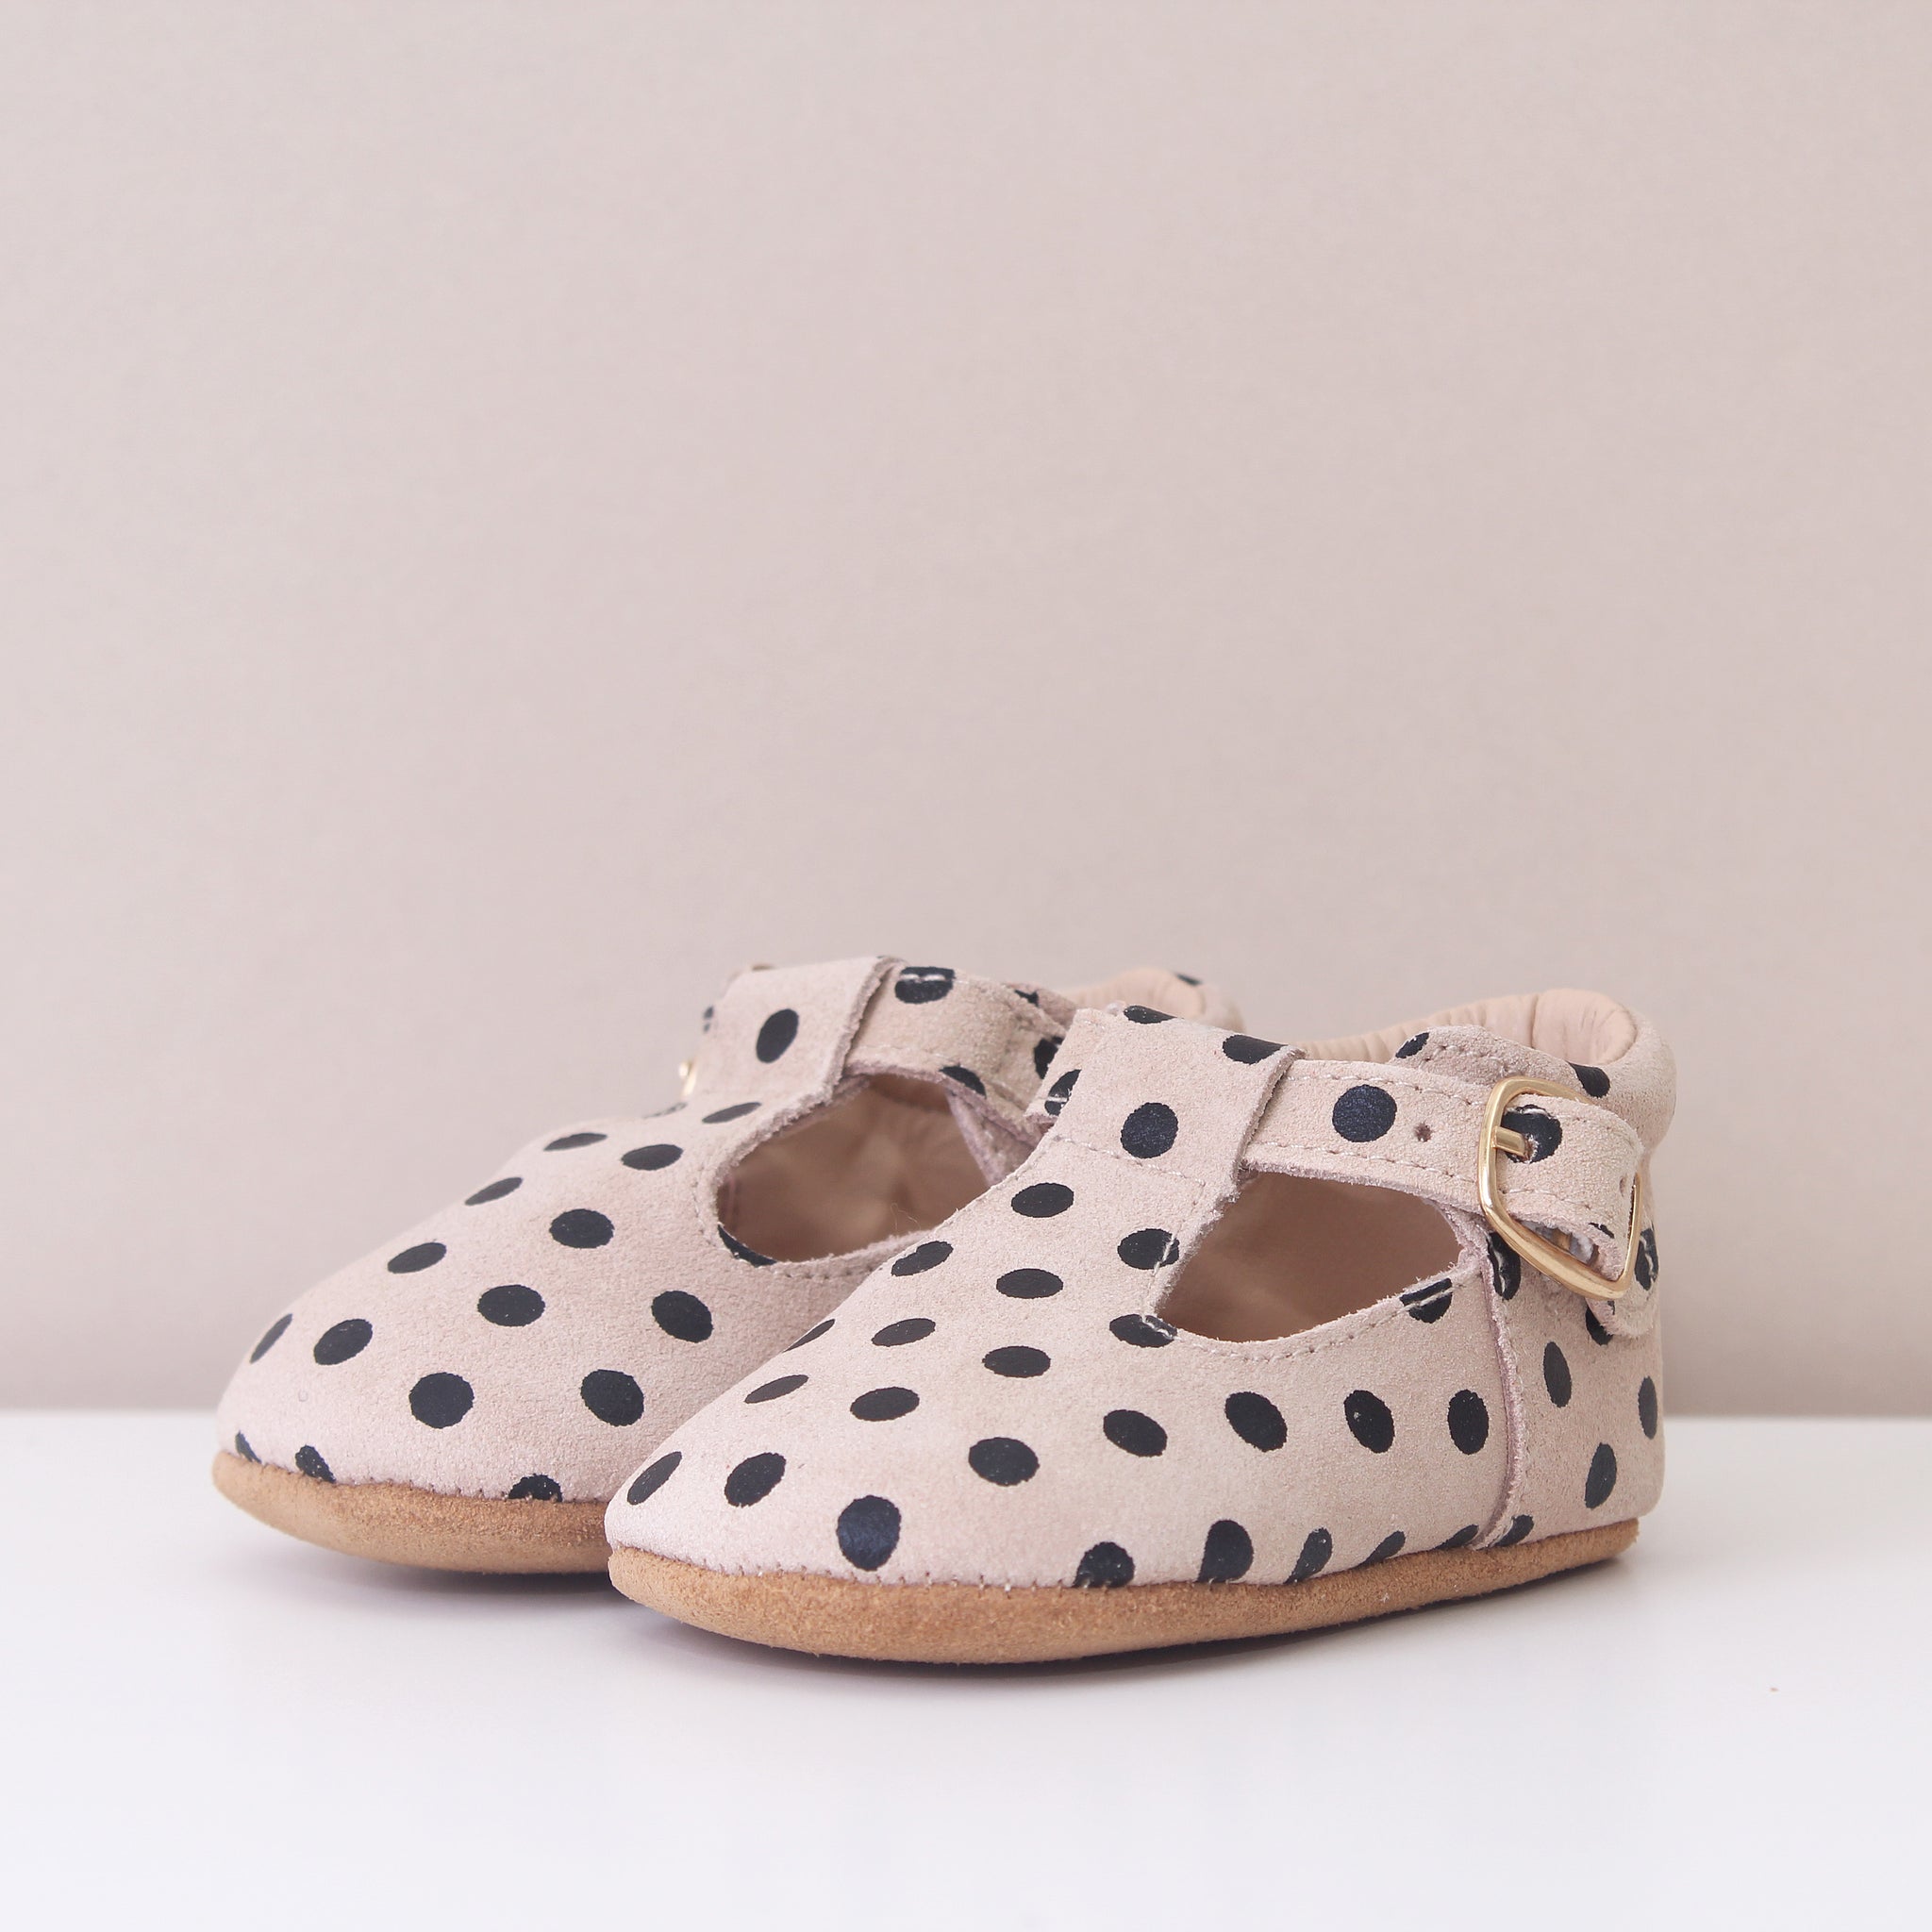 Polka Dot, suede, mary janes 